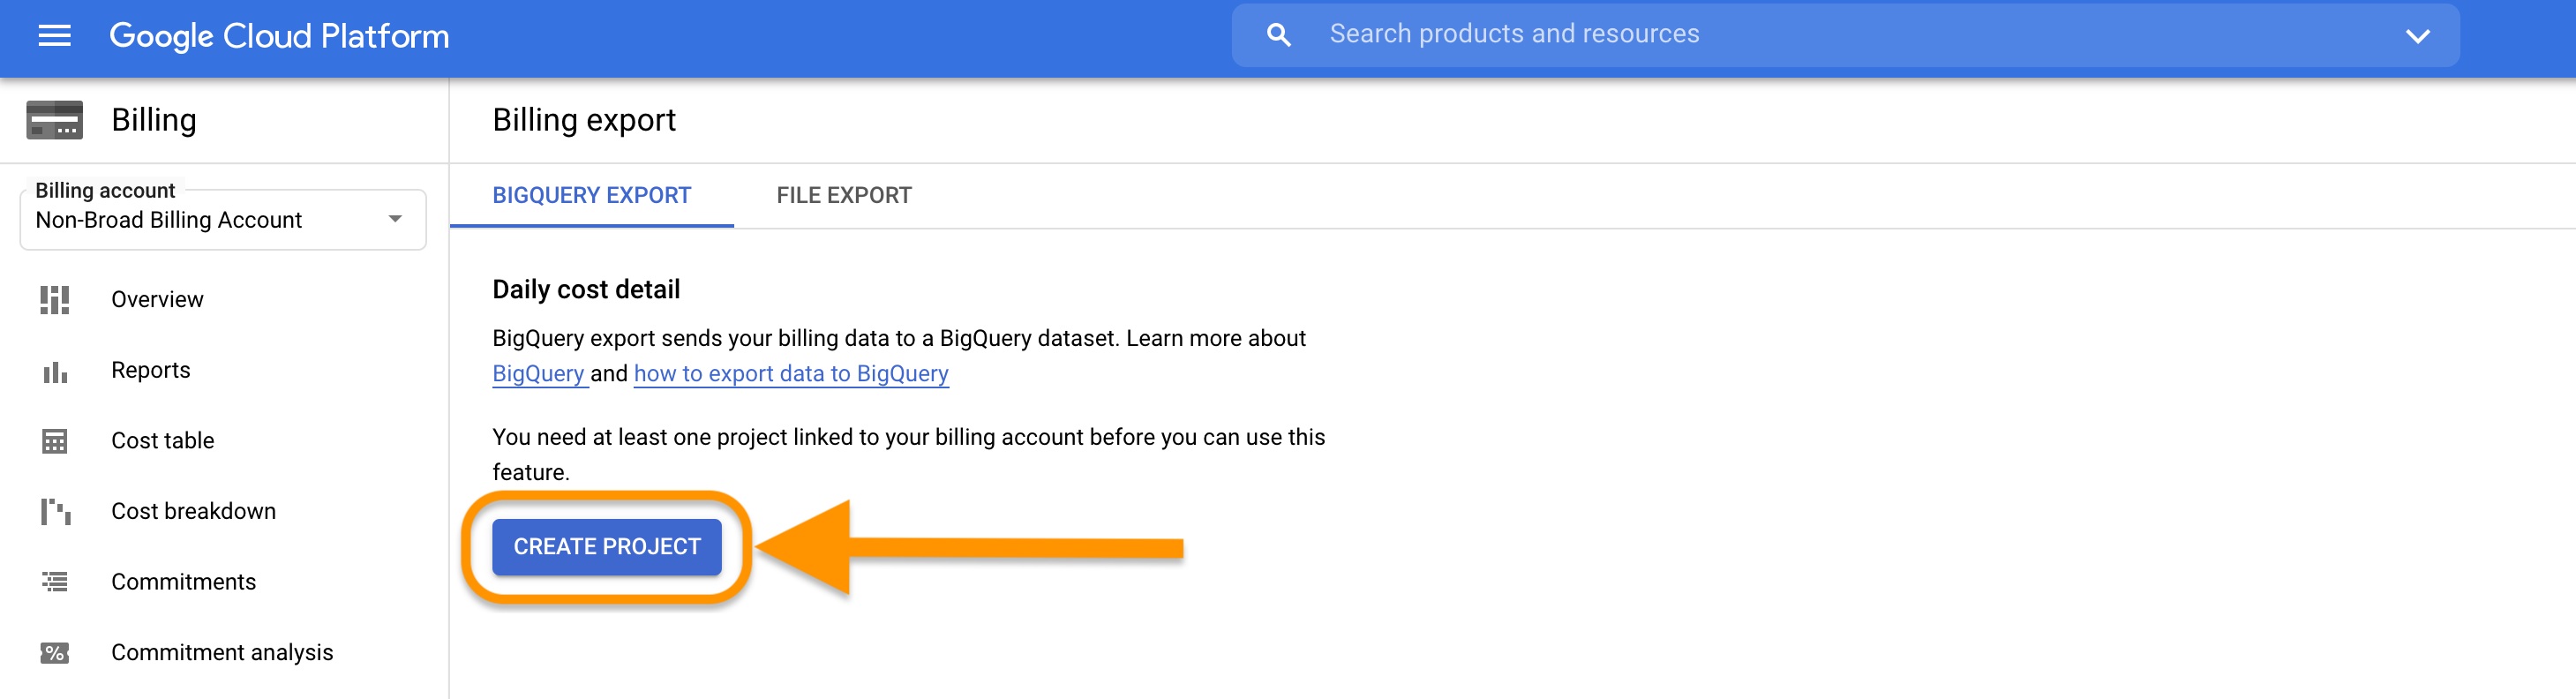 Screen shot of Google prompt to create a project for cost reporting